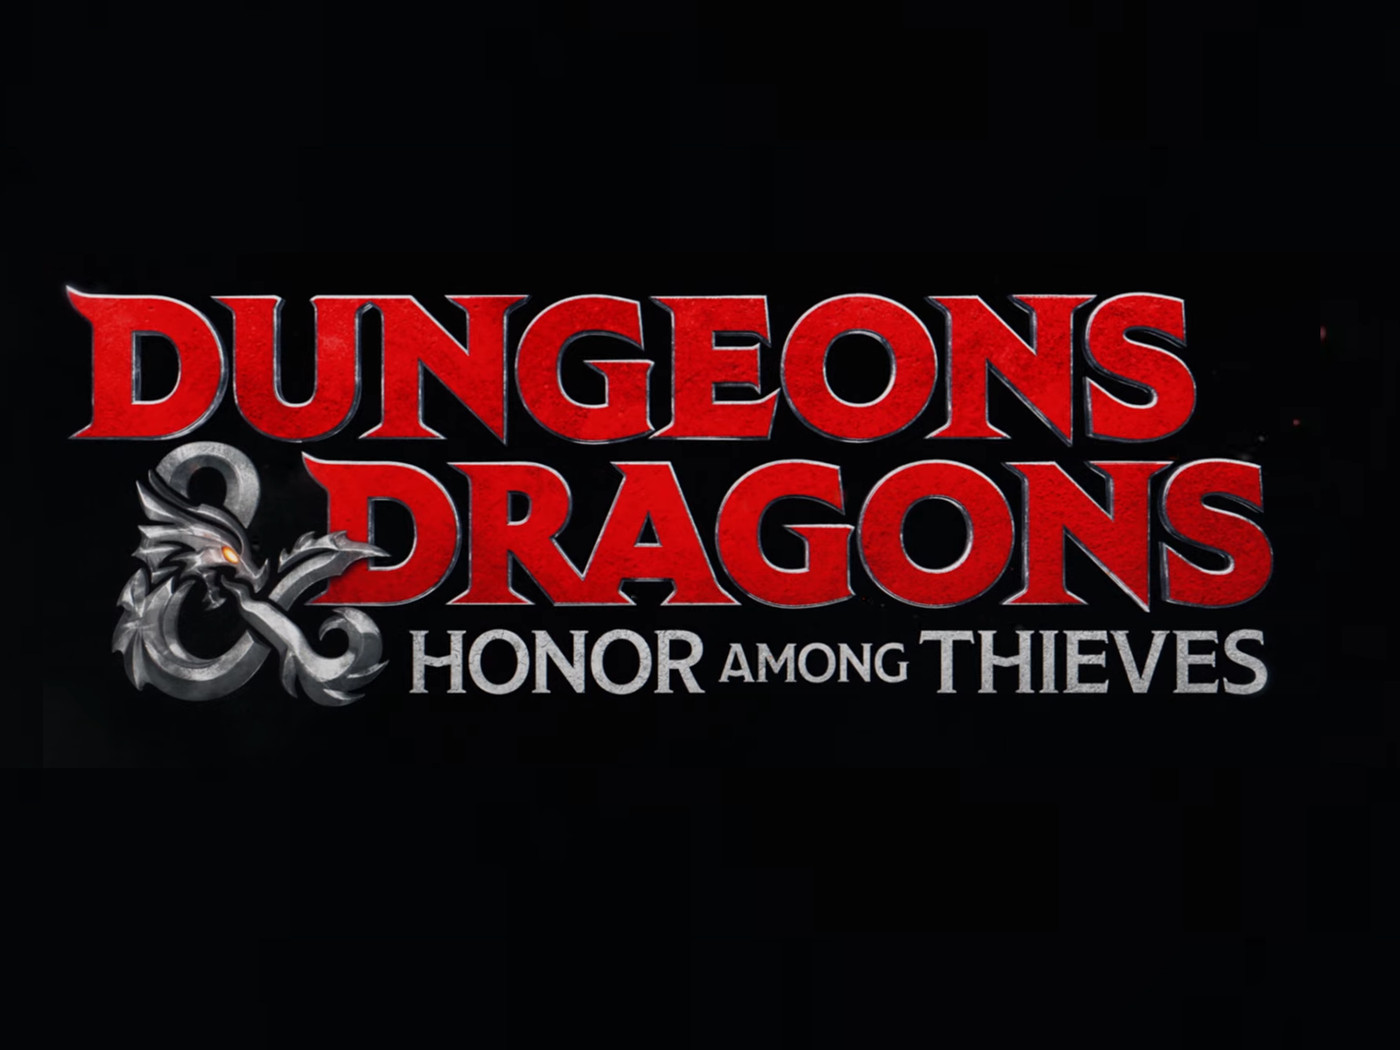 Dungeons & Dragons: Honor Among Thieves movie comes to theaters in 2023